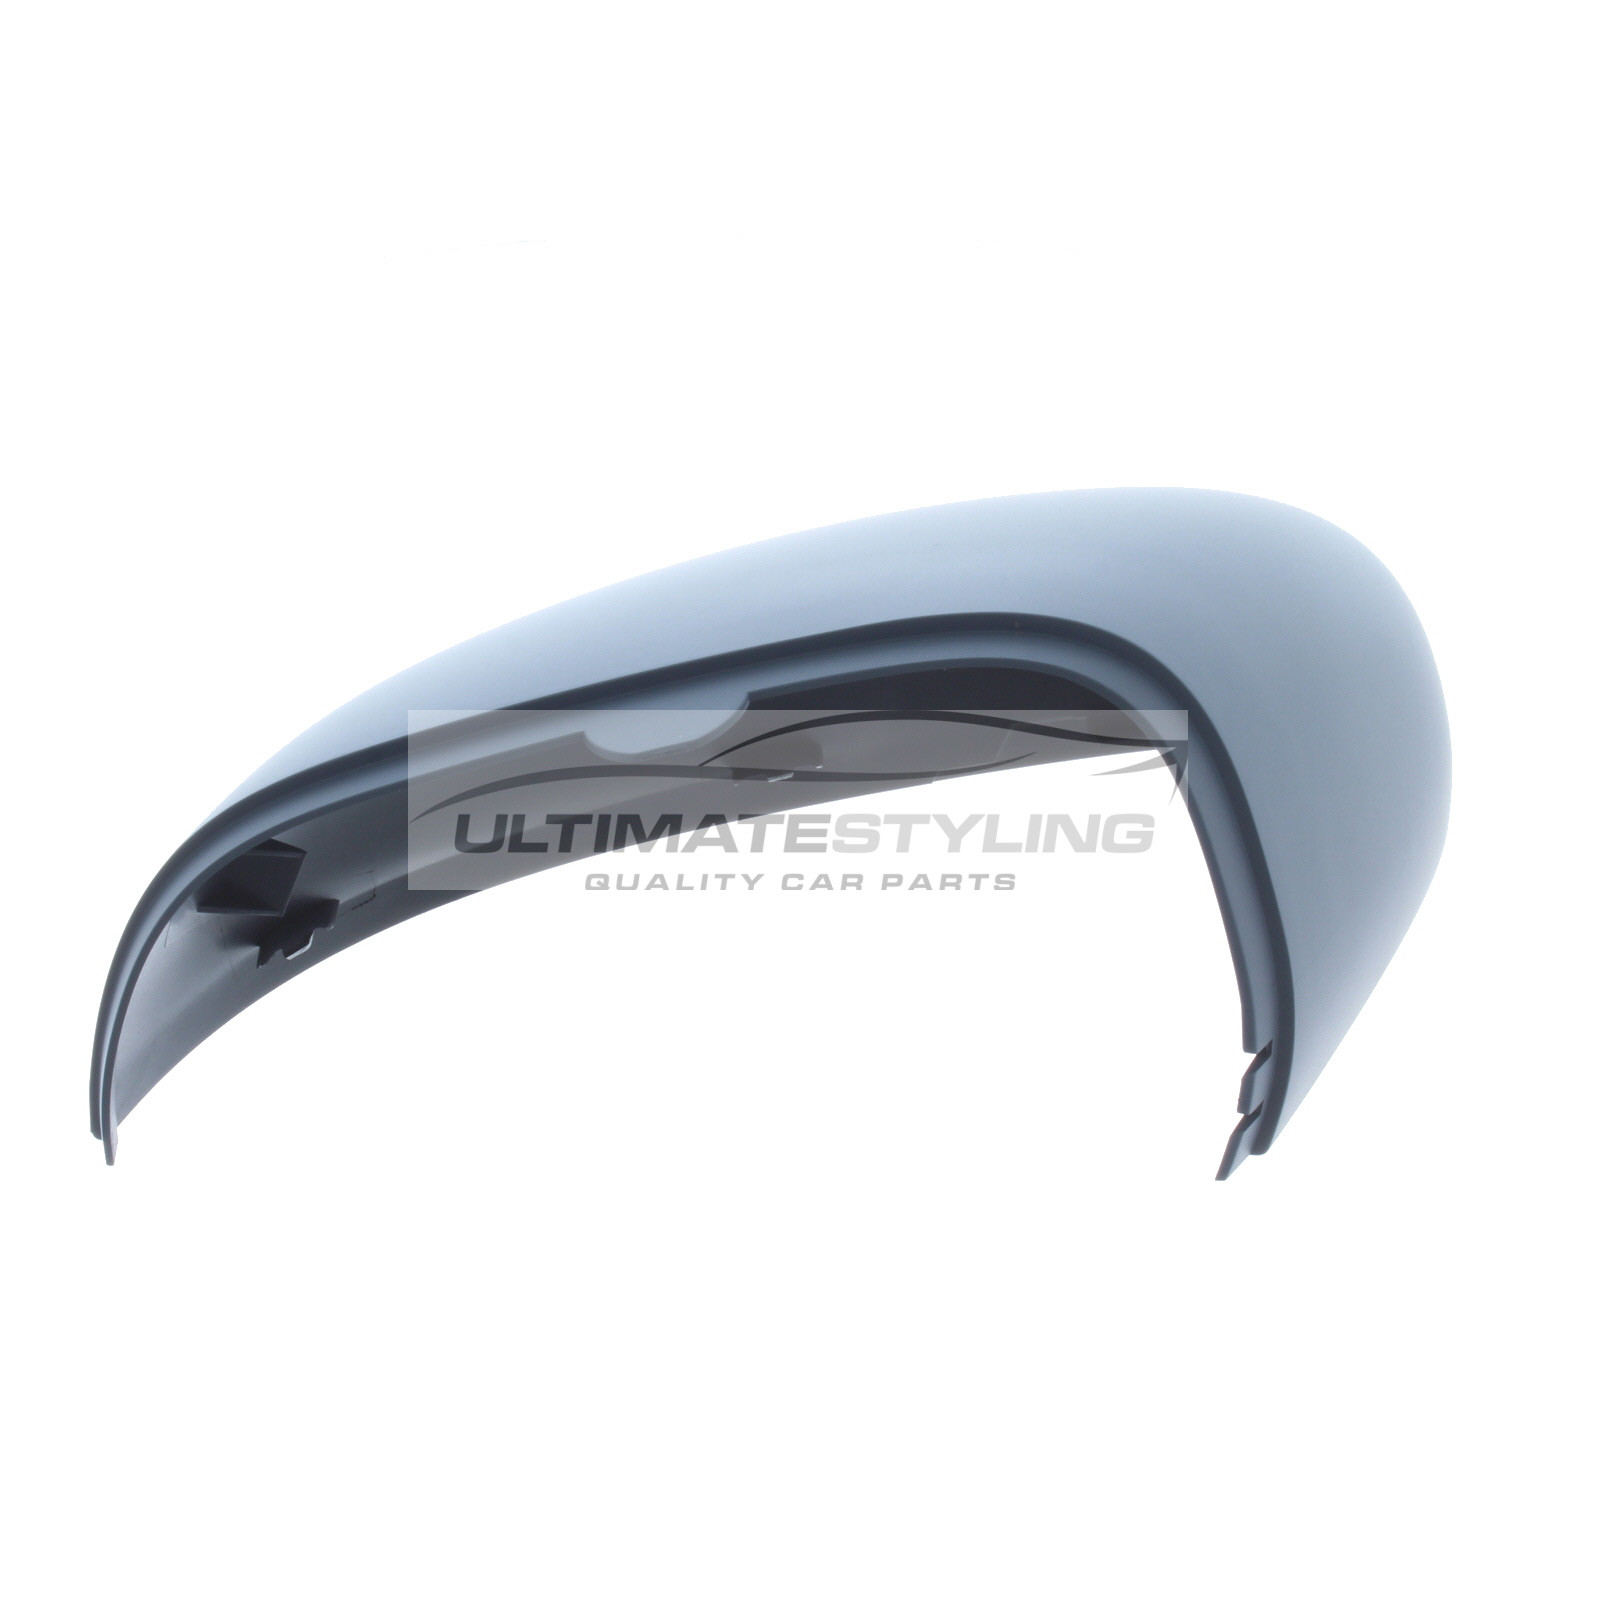 Left Hand Side Ultimate Styling Aftermarket Replacement Wing Mirror Cover Cap Colour Of Cover Primed For Passenger Side LH 